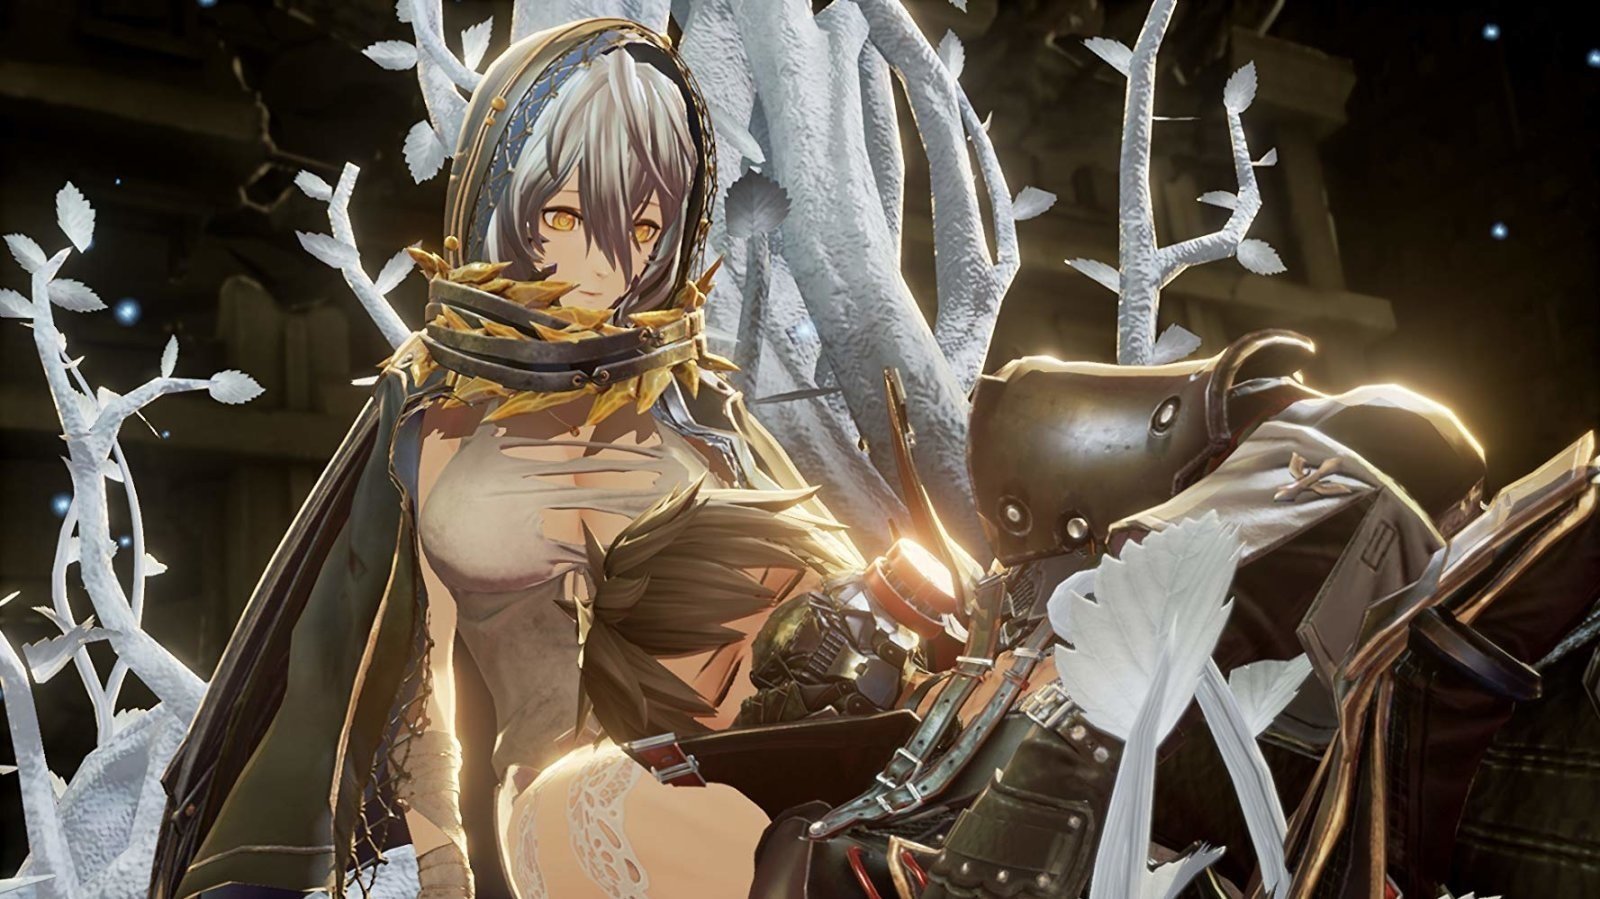 Free Code Vein Demo Available Now on PlayStation 4 and Xbox One